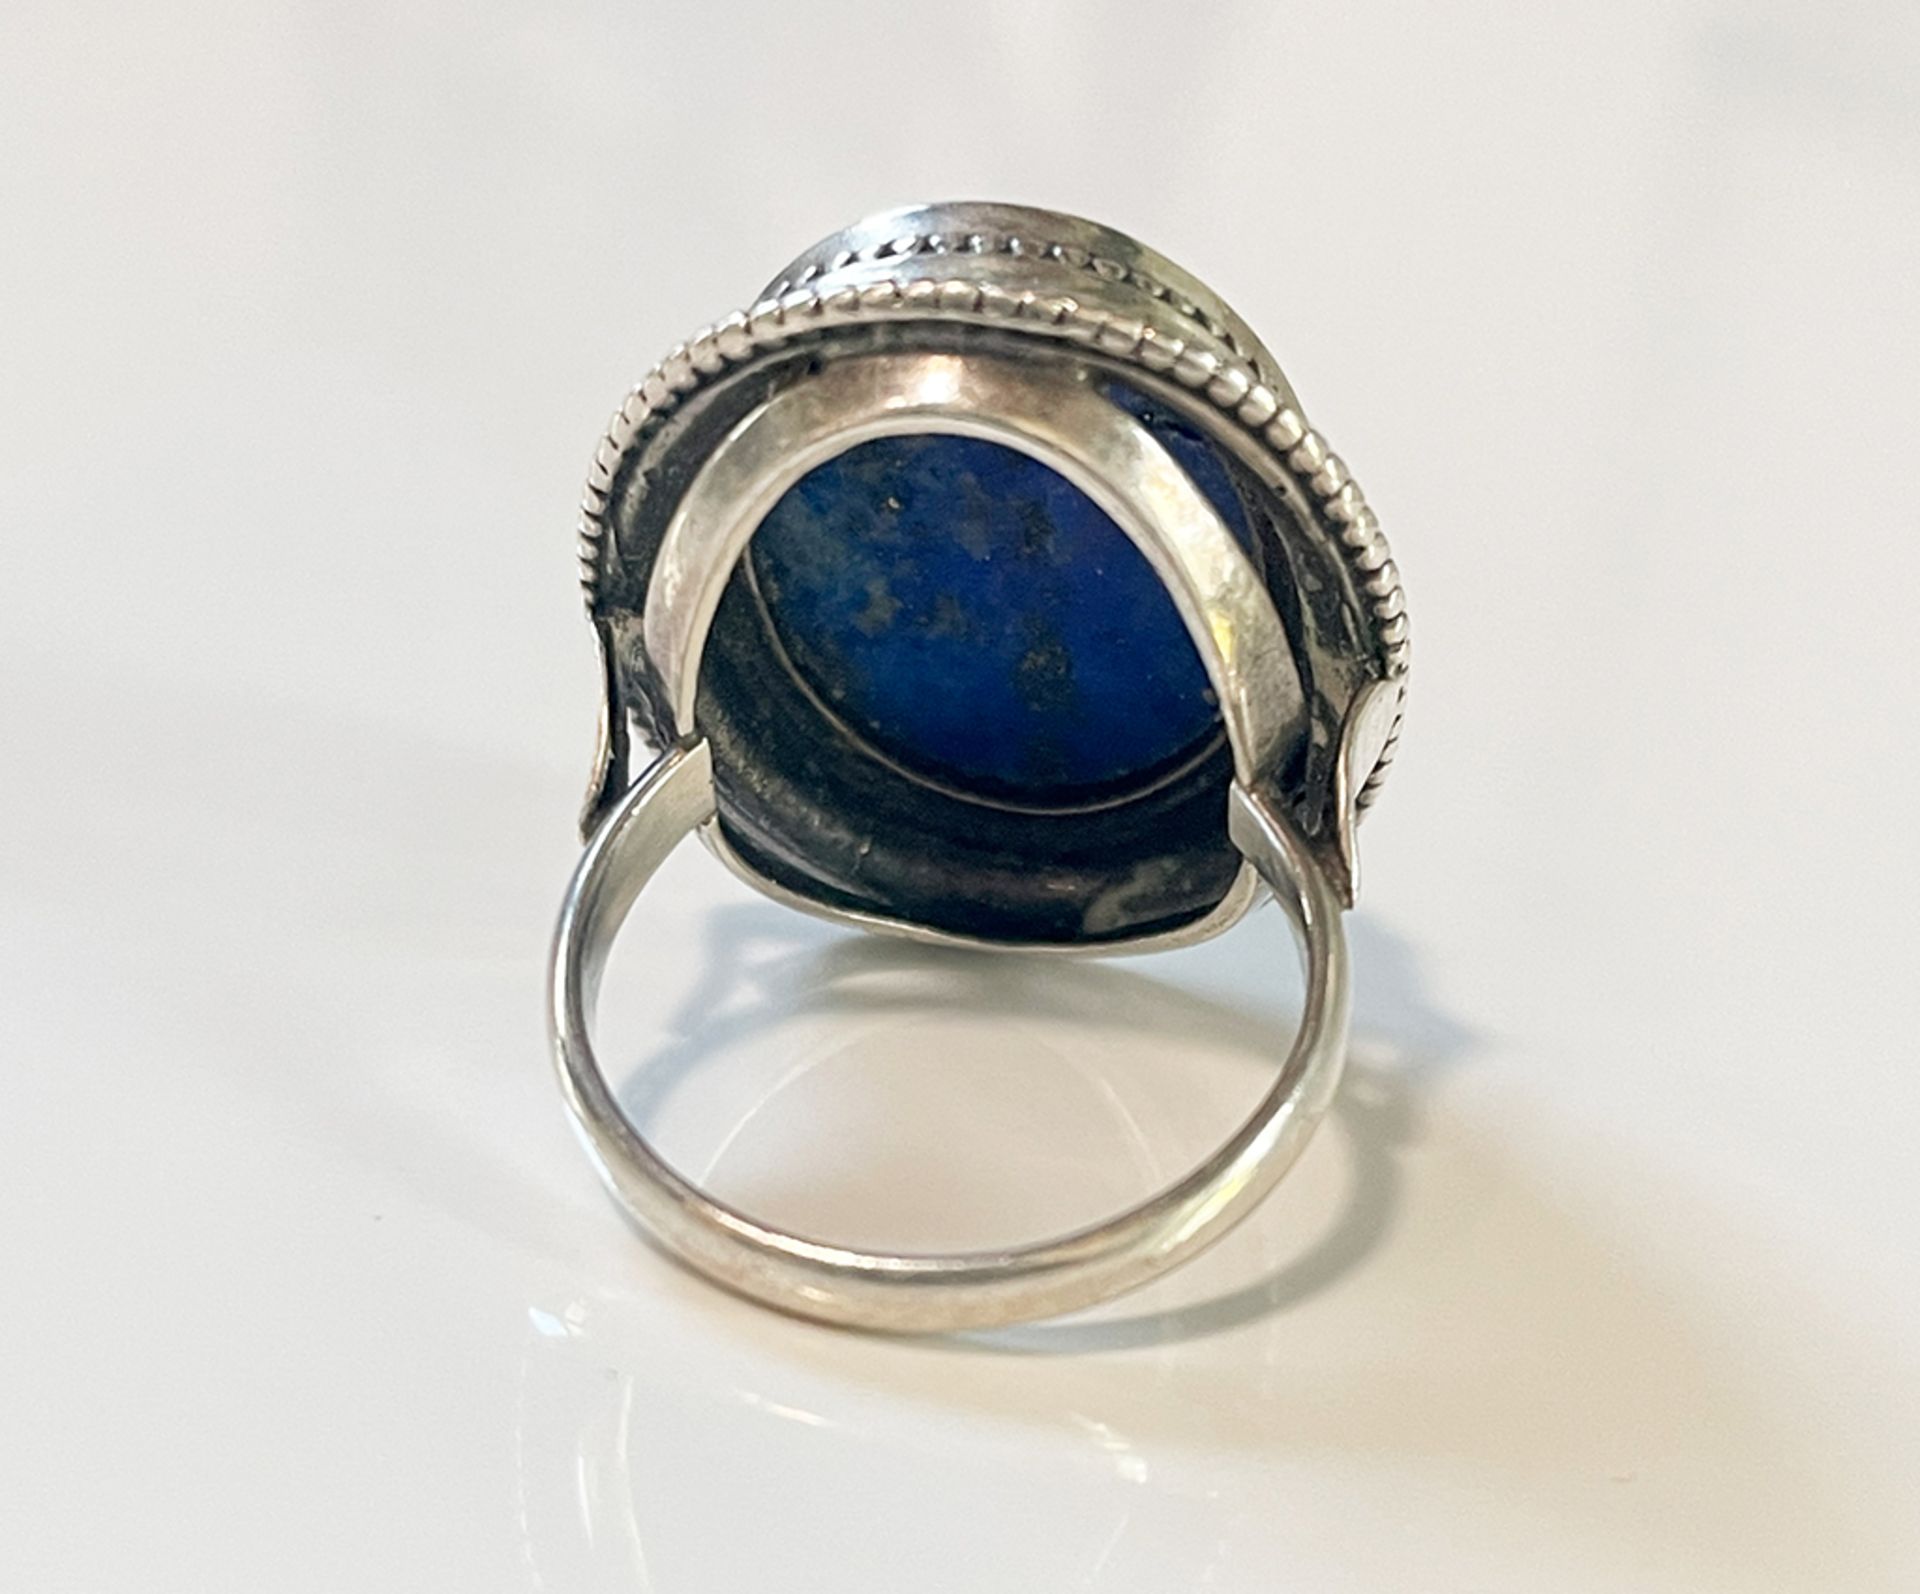 Silver Ring with Lapis Lazuli Dutch Design - Image 4 of 4